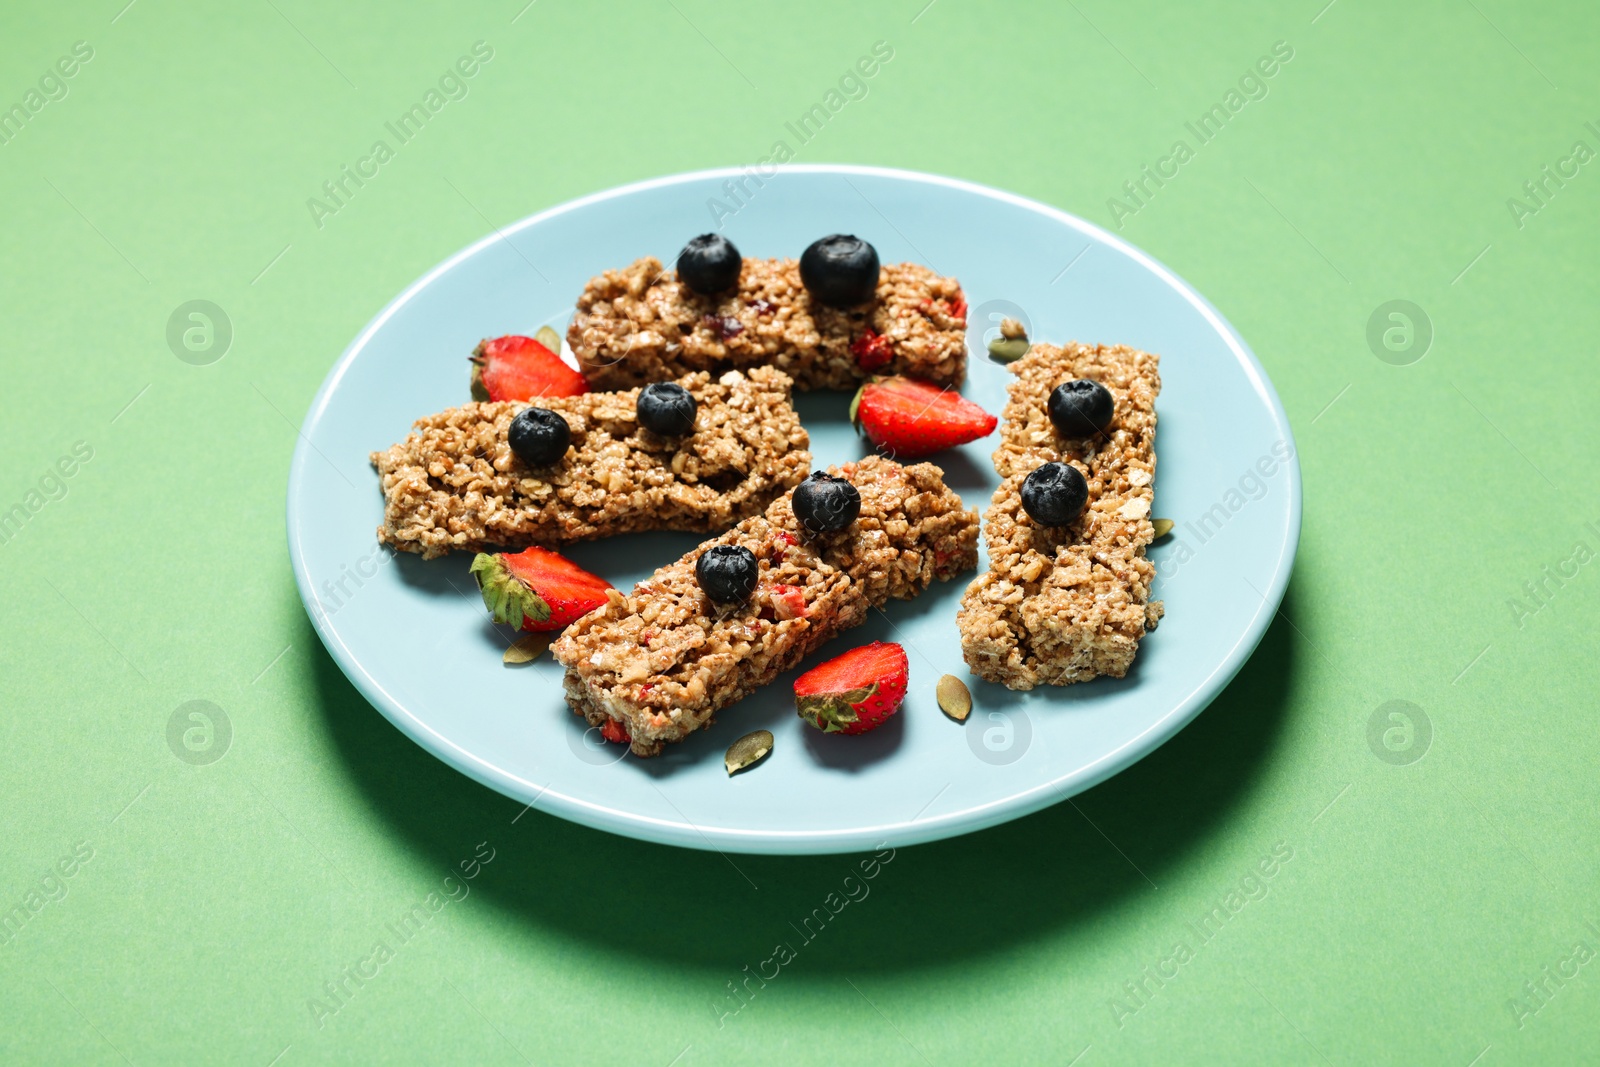 Photo of Tasty granola bars and berries on green table